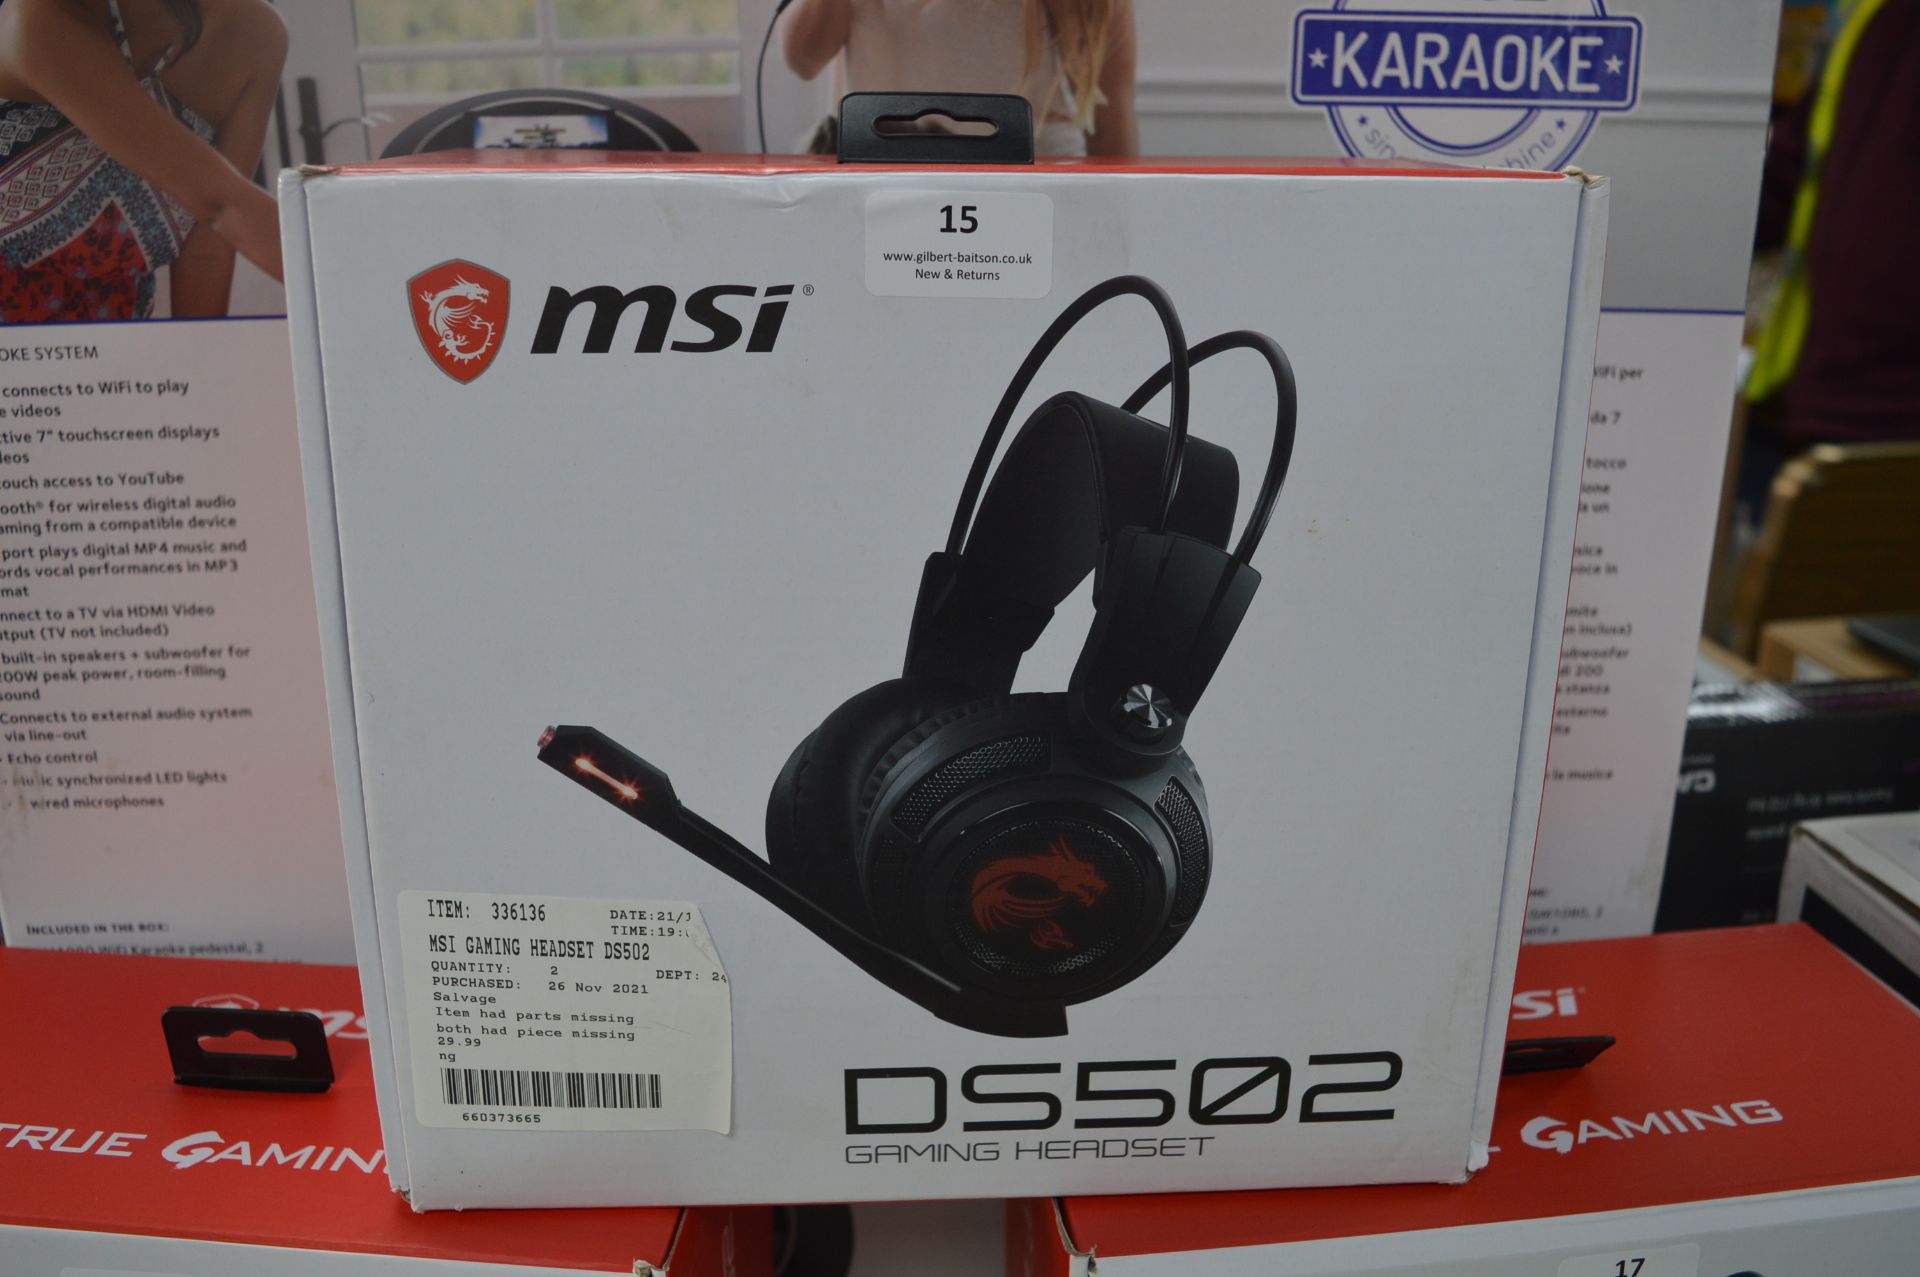 *MSI DS502 Gaming Headset